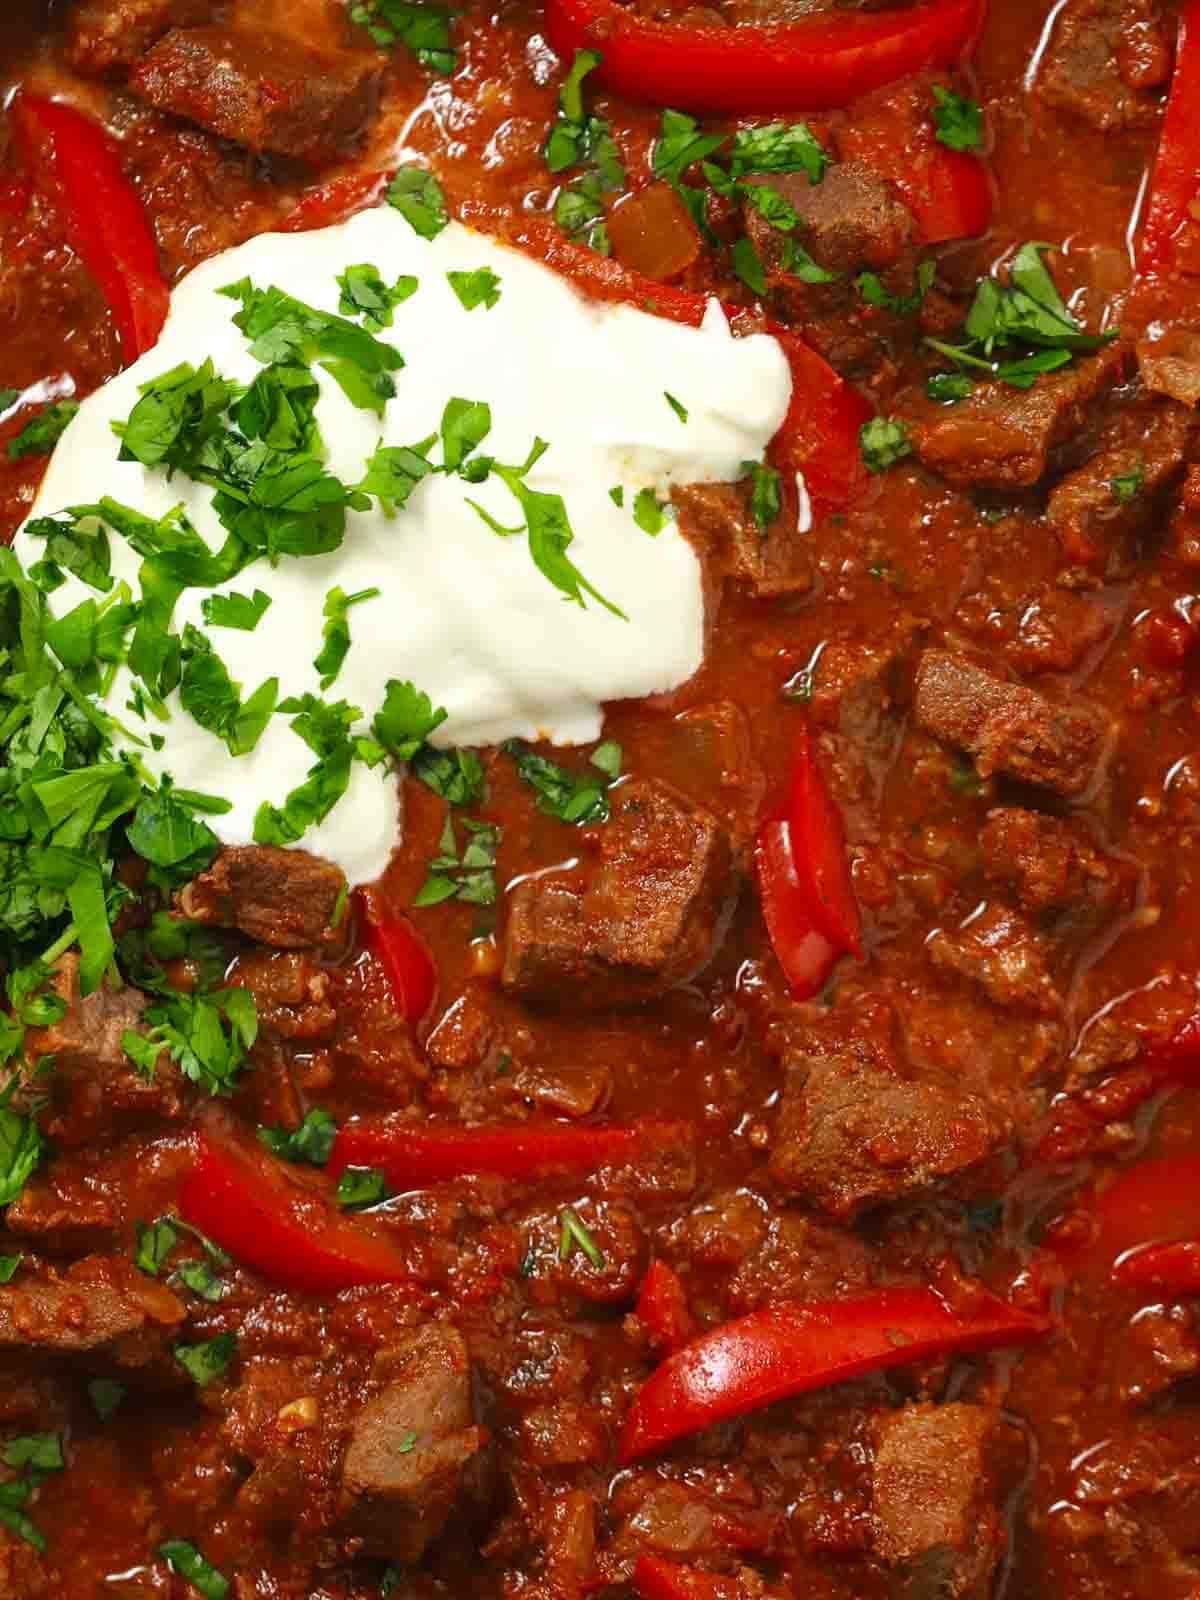 A close up of beef goulash with red pepper in a rich sauce.